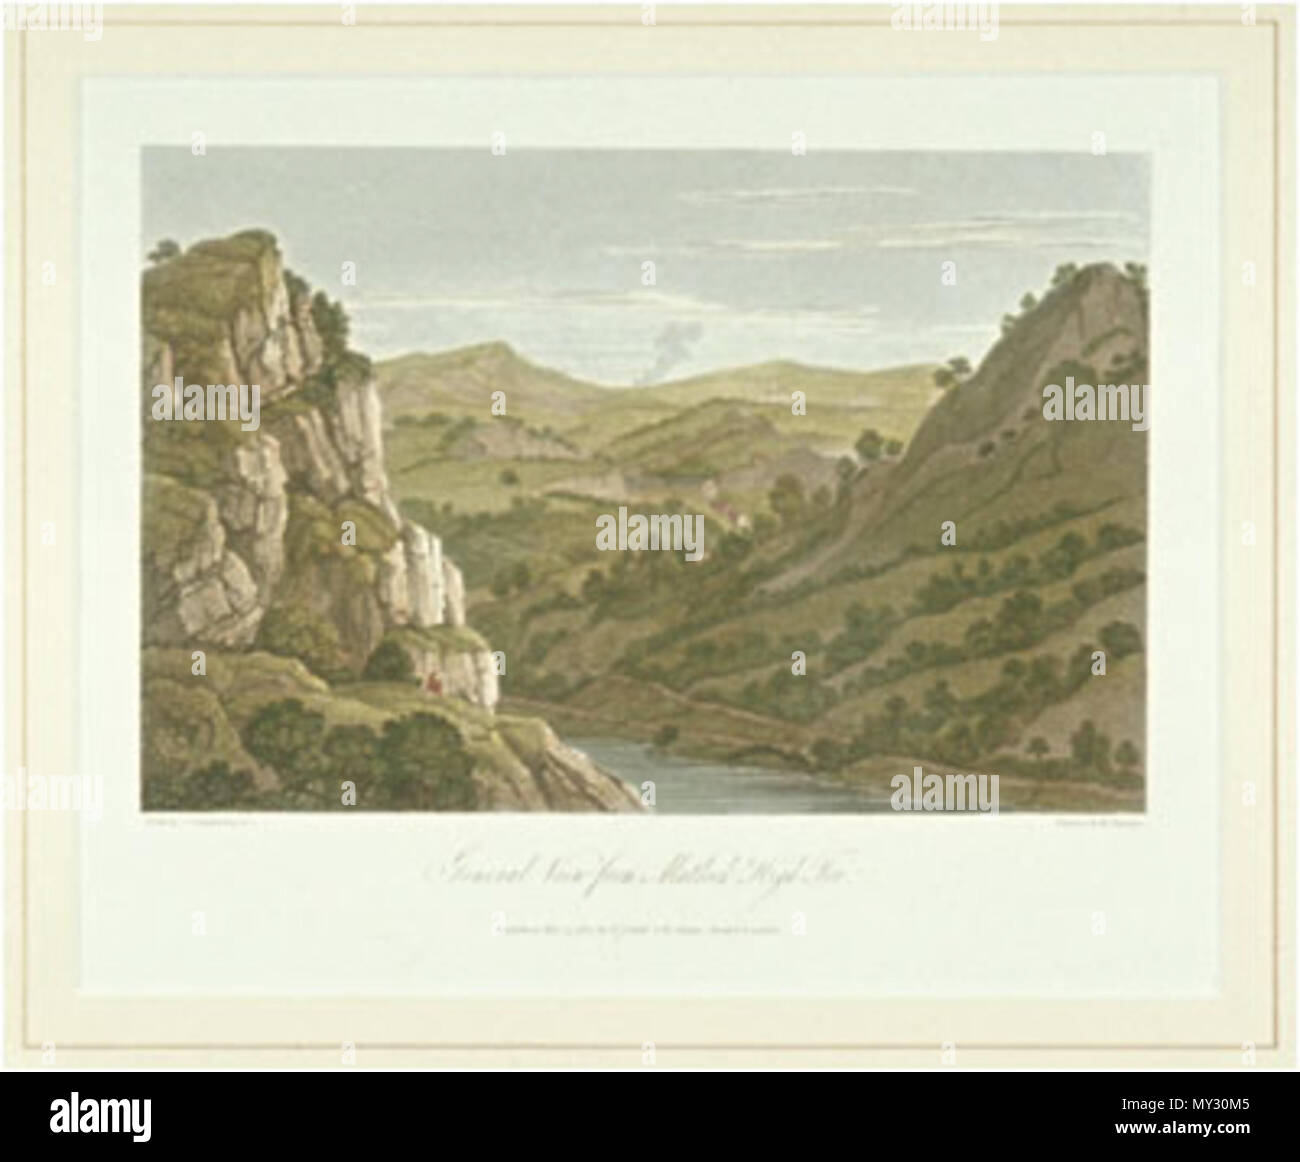 . General View from Matlock High Tor in derbyshire. Artist:Joseph FARINGTON Title:General View from Matlock High Tor Publication Title Britannia Depicta, Part VI, Derbyshire Date published 15 May 1817 Medium Coloured engraving Lettering below image: [left] Drawn by J. Farington Esq.r R.A. [right] Engraved by John & Letitia Byrne. / Matlock Church. / Published May 15, 1817, by T. Cadell & W. Davies, Strand, London Published T. Cadell & W. Davies, Strand, London, 15 May 1817 Acquisition Purchased from Sotheby's by GAC, 22 February 1977 Number 13030 . 15 May 1817. Joseph FARINGTON engraved by 550 Stock Photo